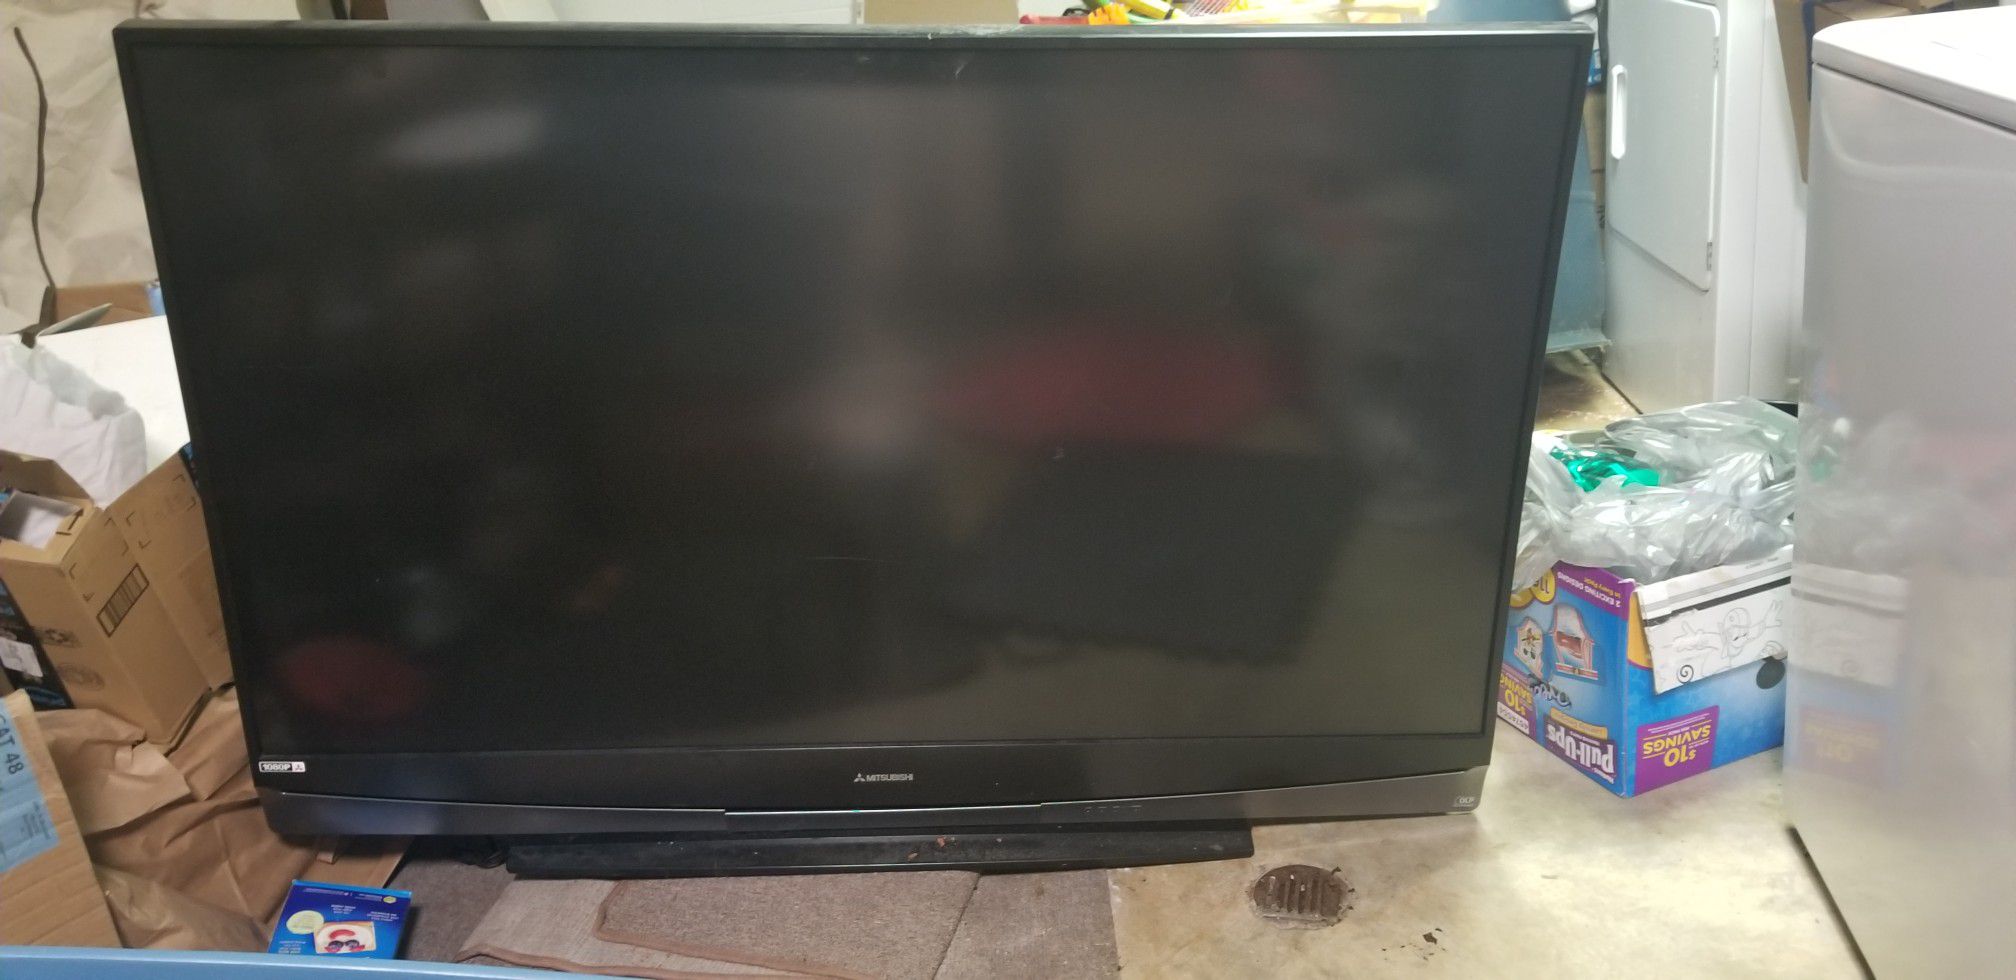 70 inch tv needs a replacement part. The TV has white pixels and needs a part that costs about $200 .